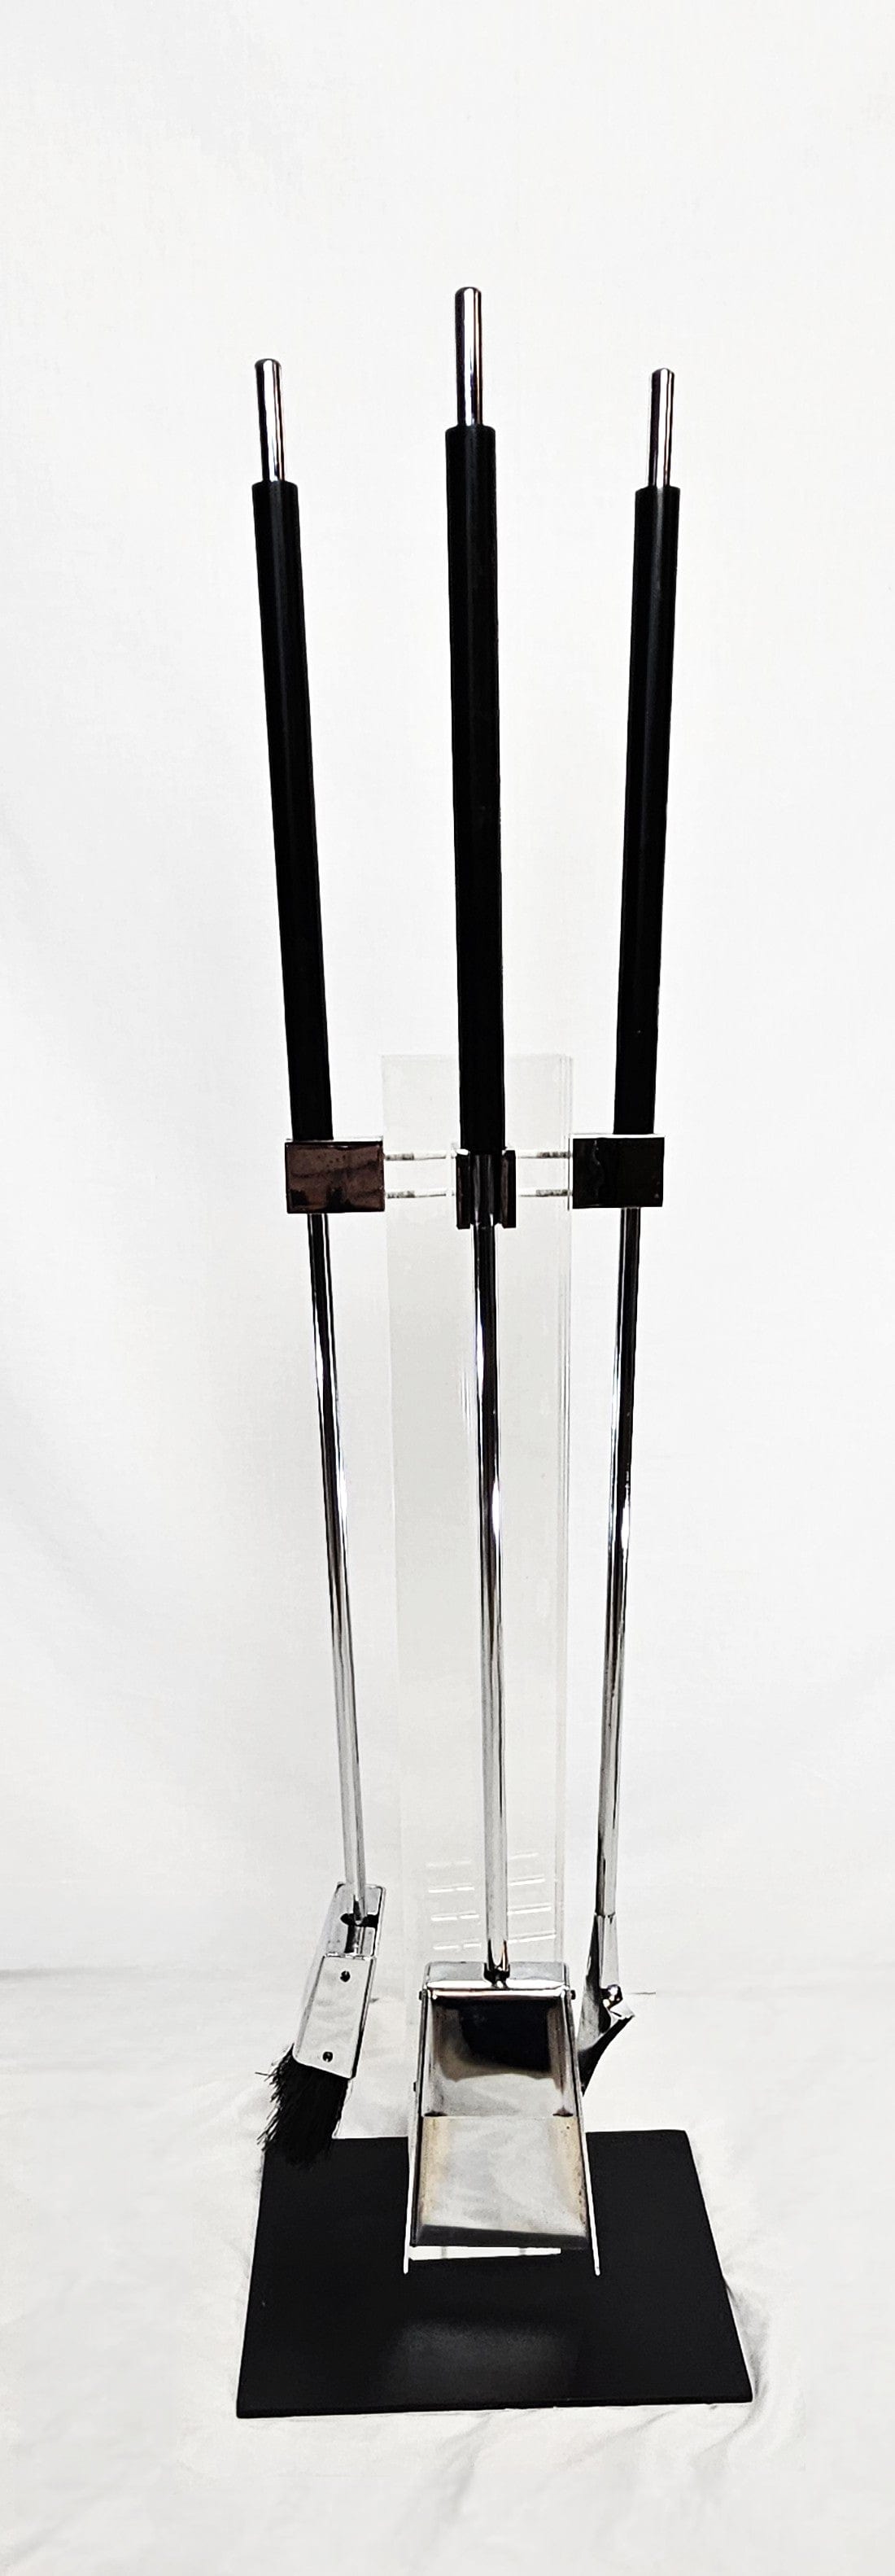 Albrizzi Fireplace Tools MCM Albrizzi Italy Lucite Chrome Fireplace Tools